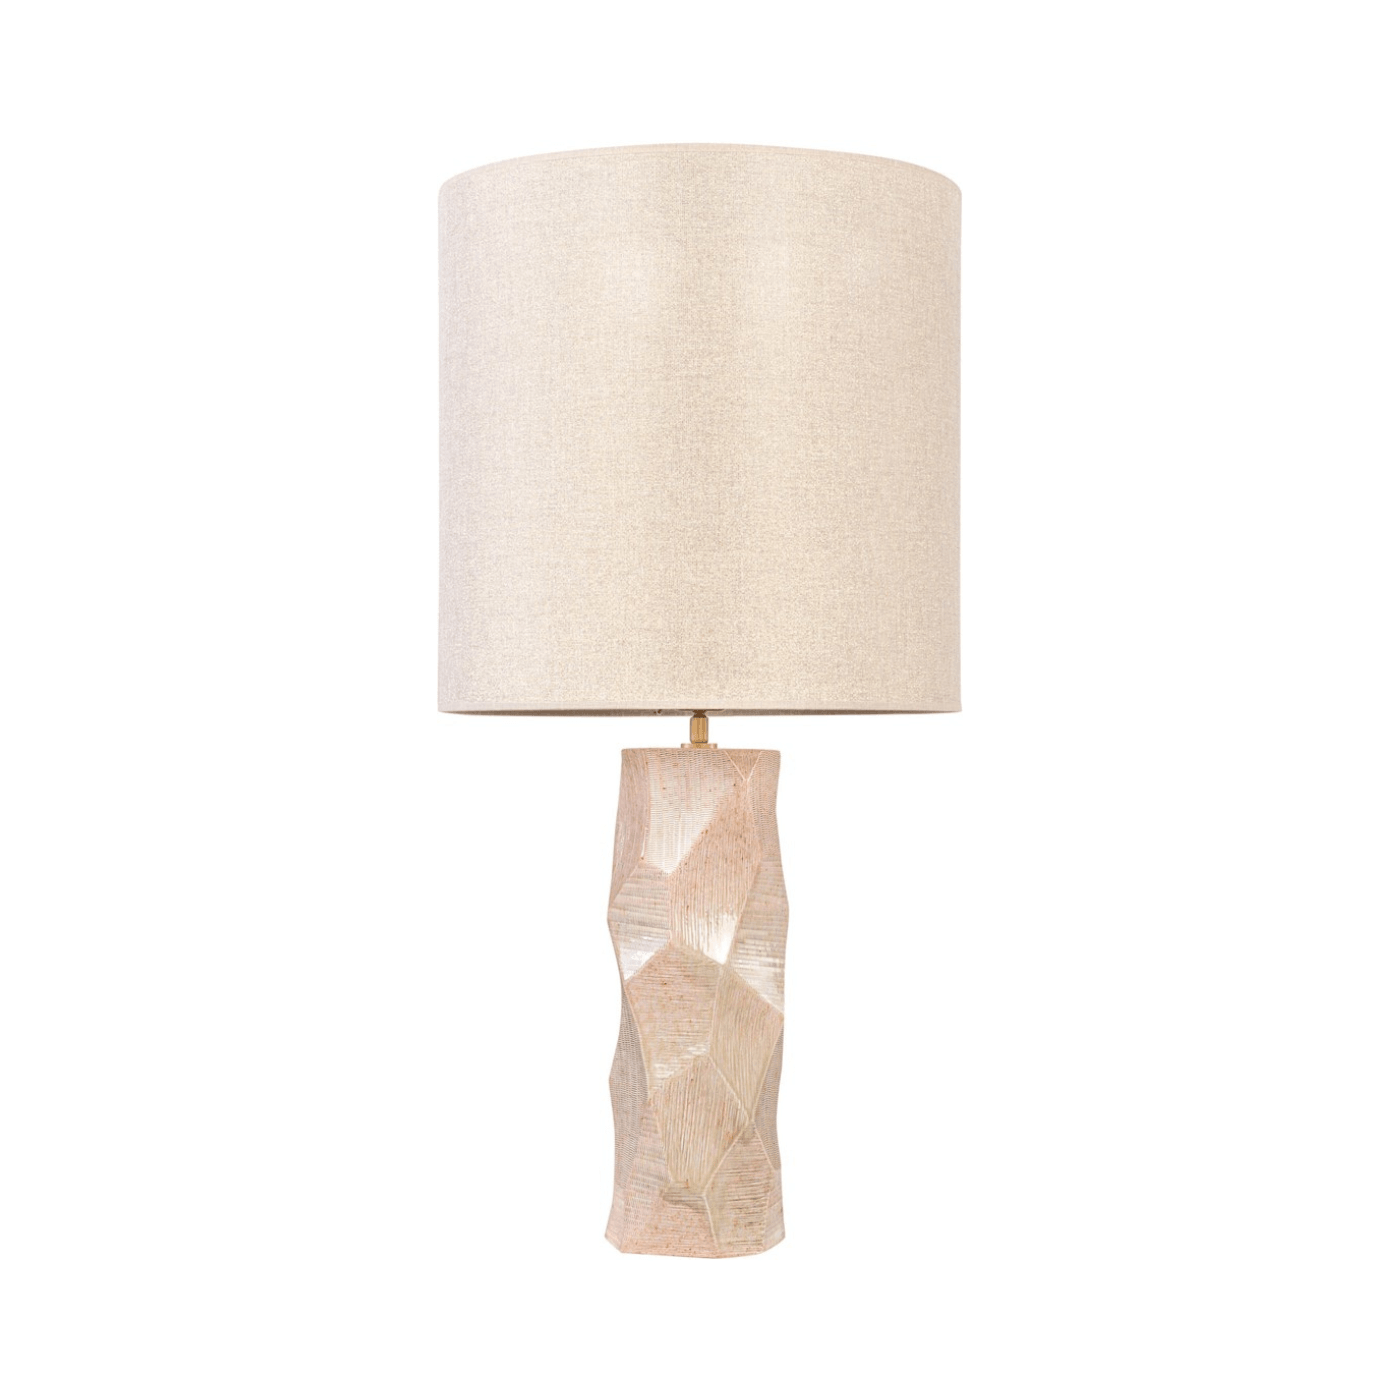 Abstract Pastel Earthenware Table Lamp with Shade - Maison Rêves UK